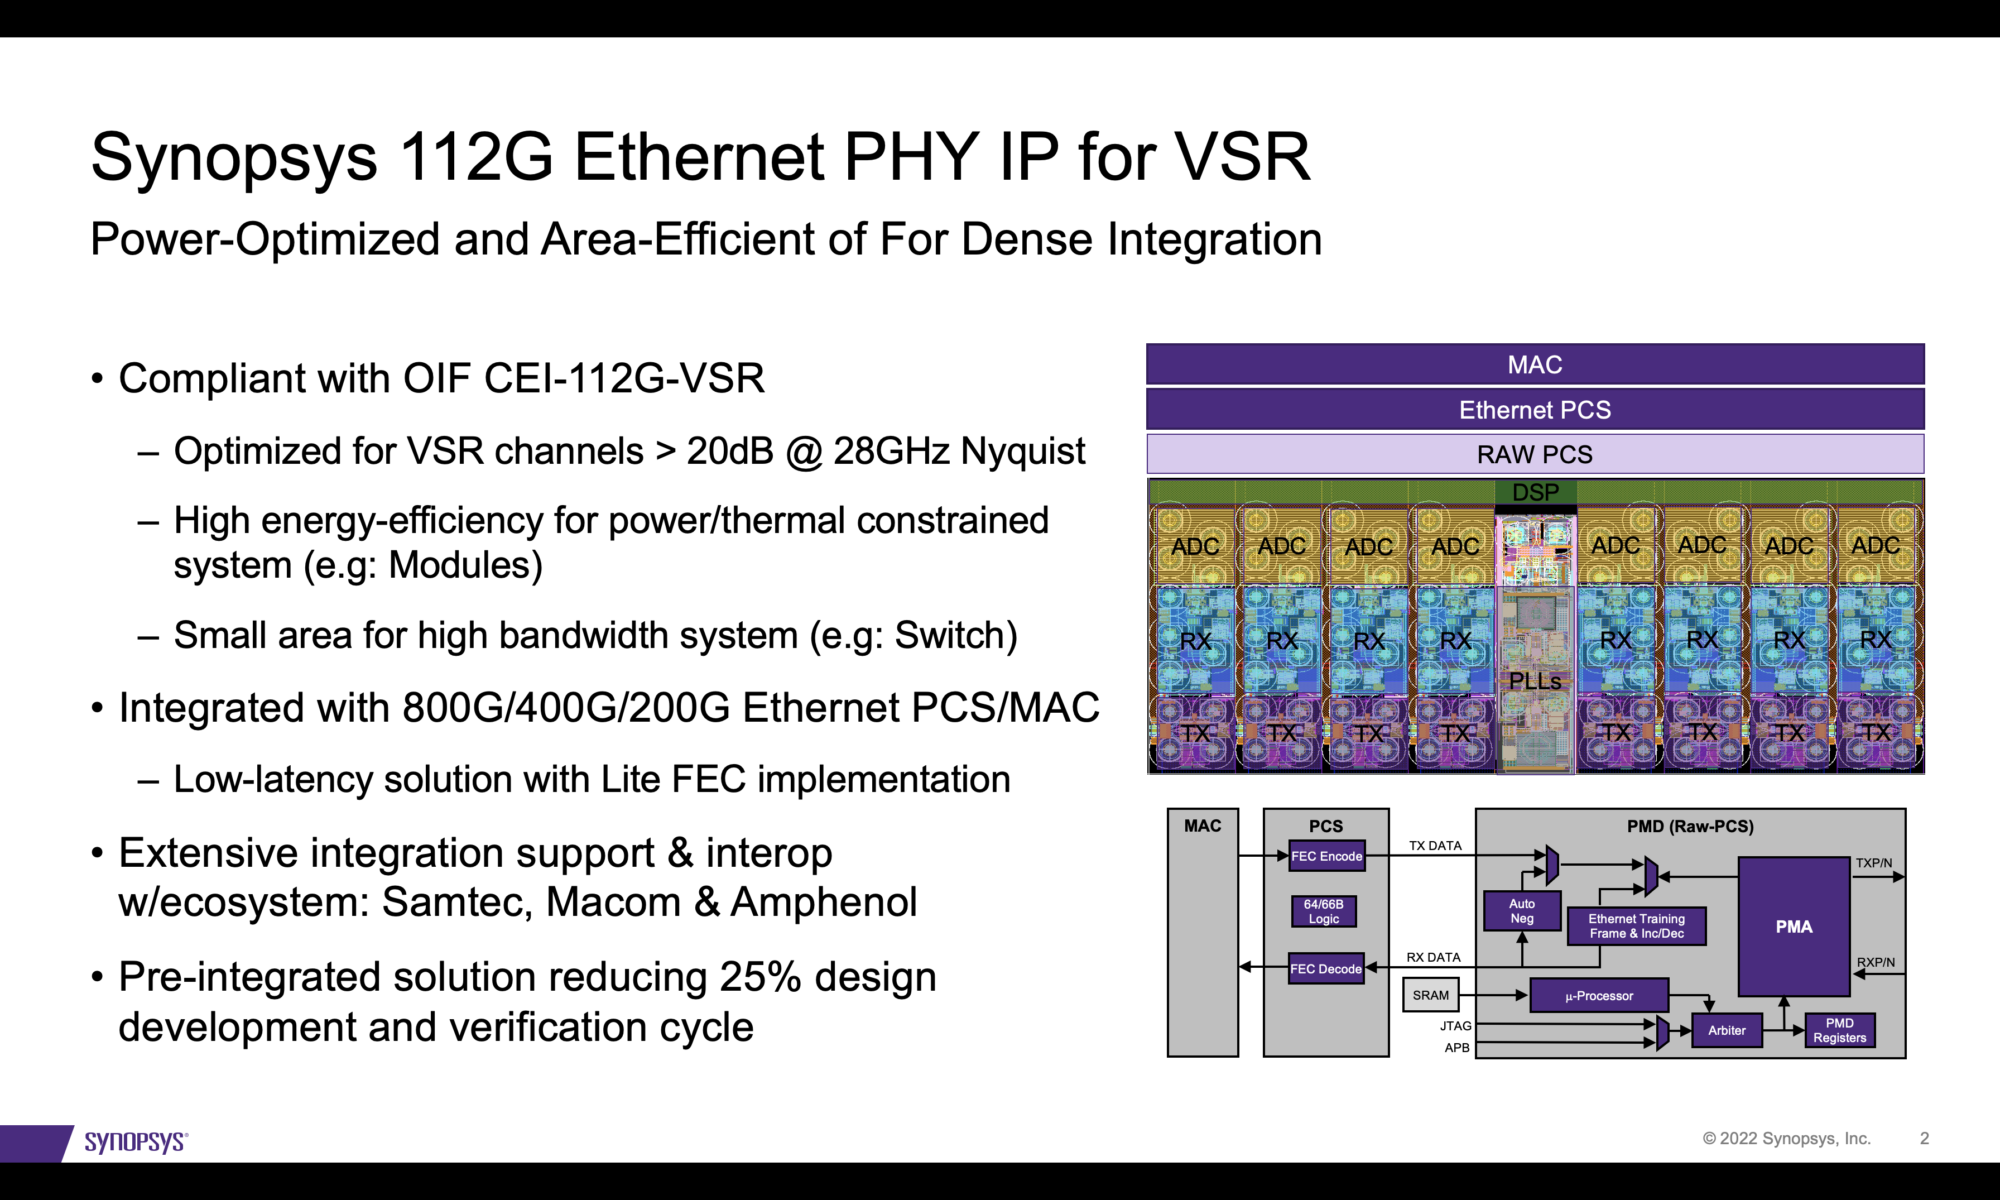 Synopsys 112G Ethernet PHY IP for VSR